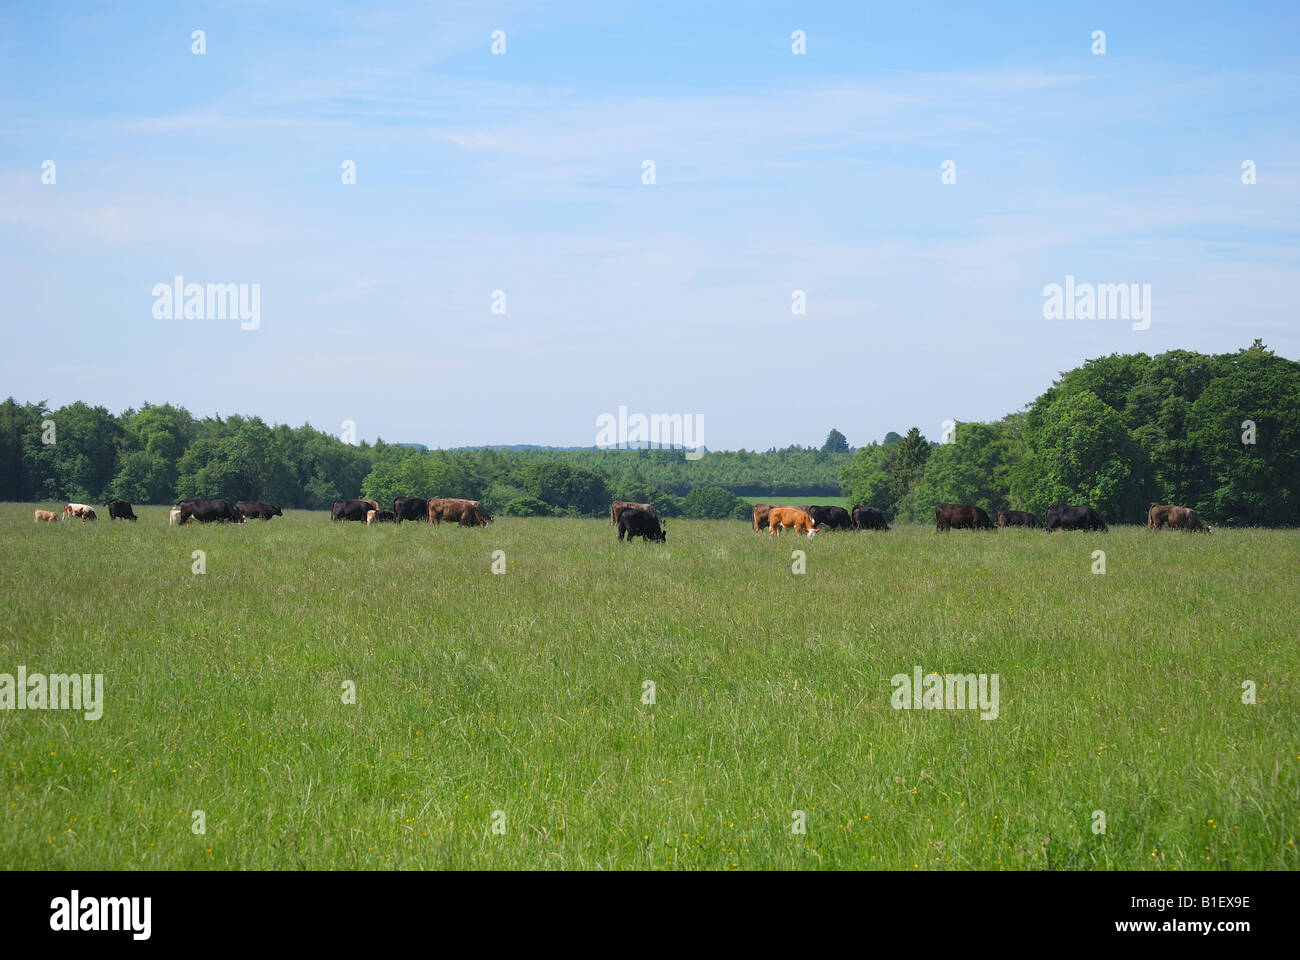 Cattle in field, Chipping Campden, Cotswolds, Gloucestershire, Angleterre, Royaume-Uni Banque D'Images